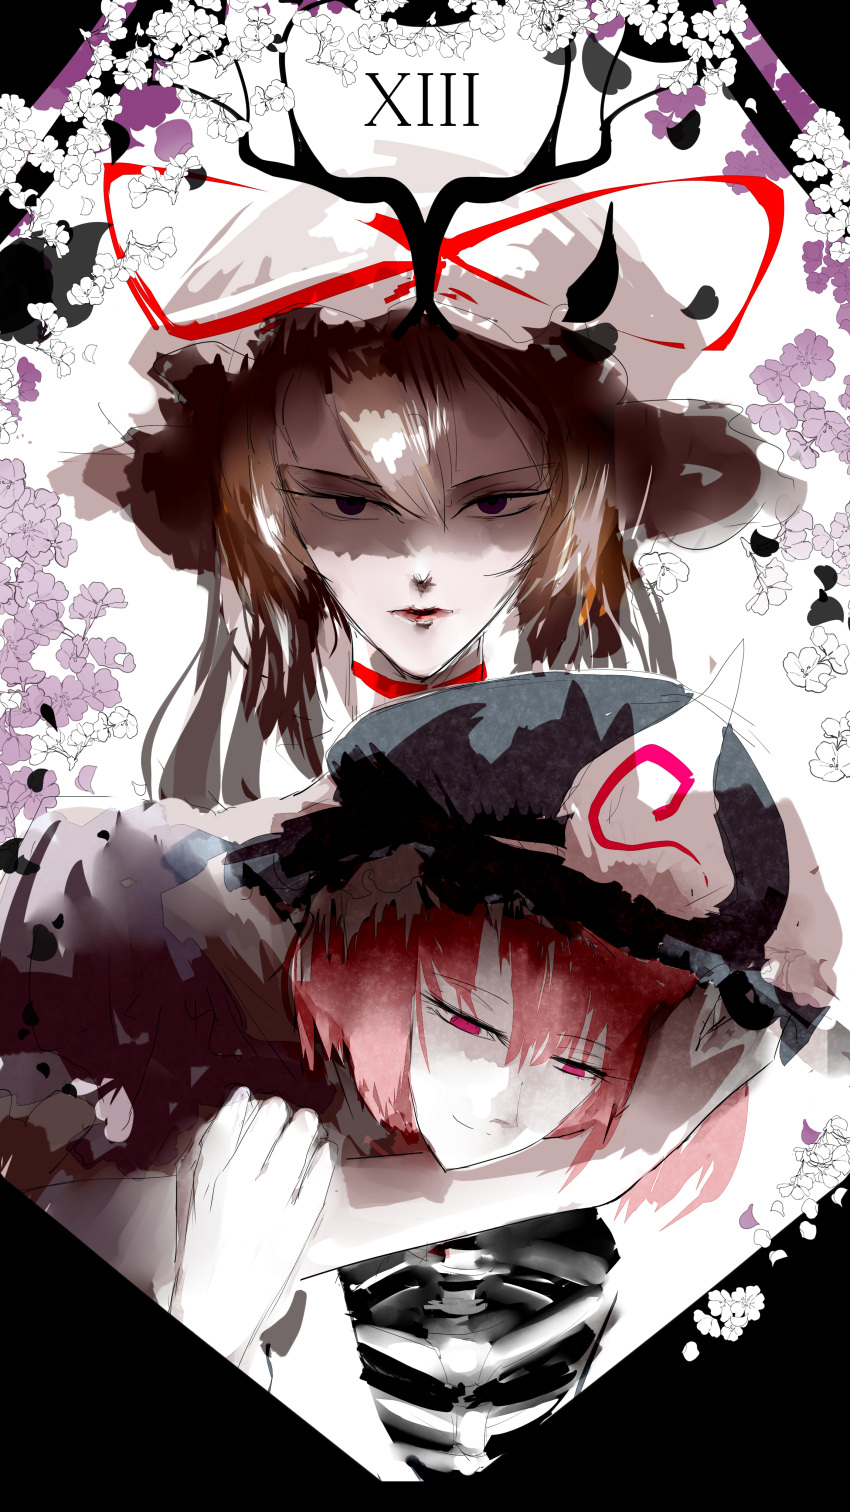 2girls absurdres bad_proportions bangs blonde_hair cherry_blossoms choker death dress expressionless face flower hair_between_eyes hand_on_another's_arm hat hat_ribbon highres lips long_hair looking_at_viewer looking_down mob_cap multiple_girls petals pink_eyes pink_hair purple_dress ribbon roman_numerals saigyouji_yuyuko shaded_face skeleton smile touhou triangular_headpiece upper_body veil violet_eyes yakumo_yukari yappa_muri